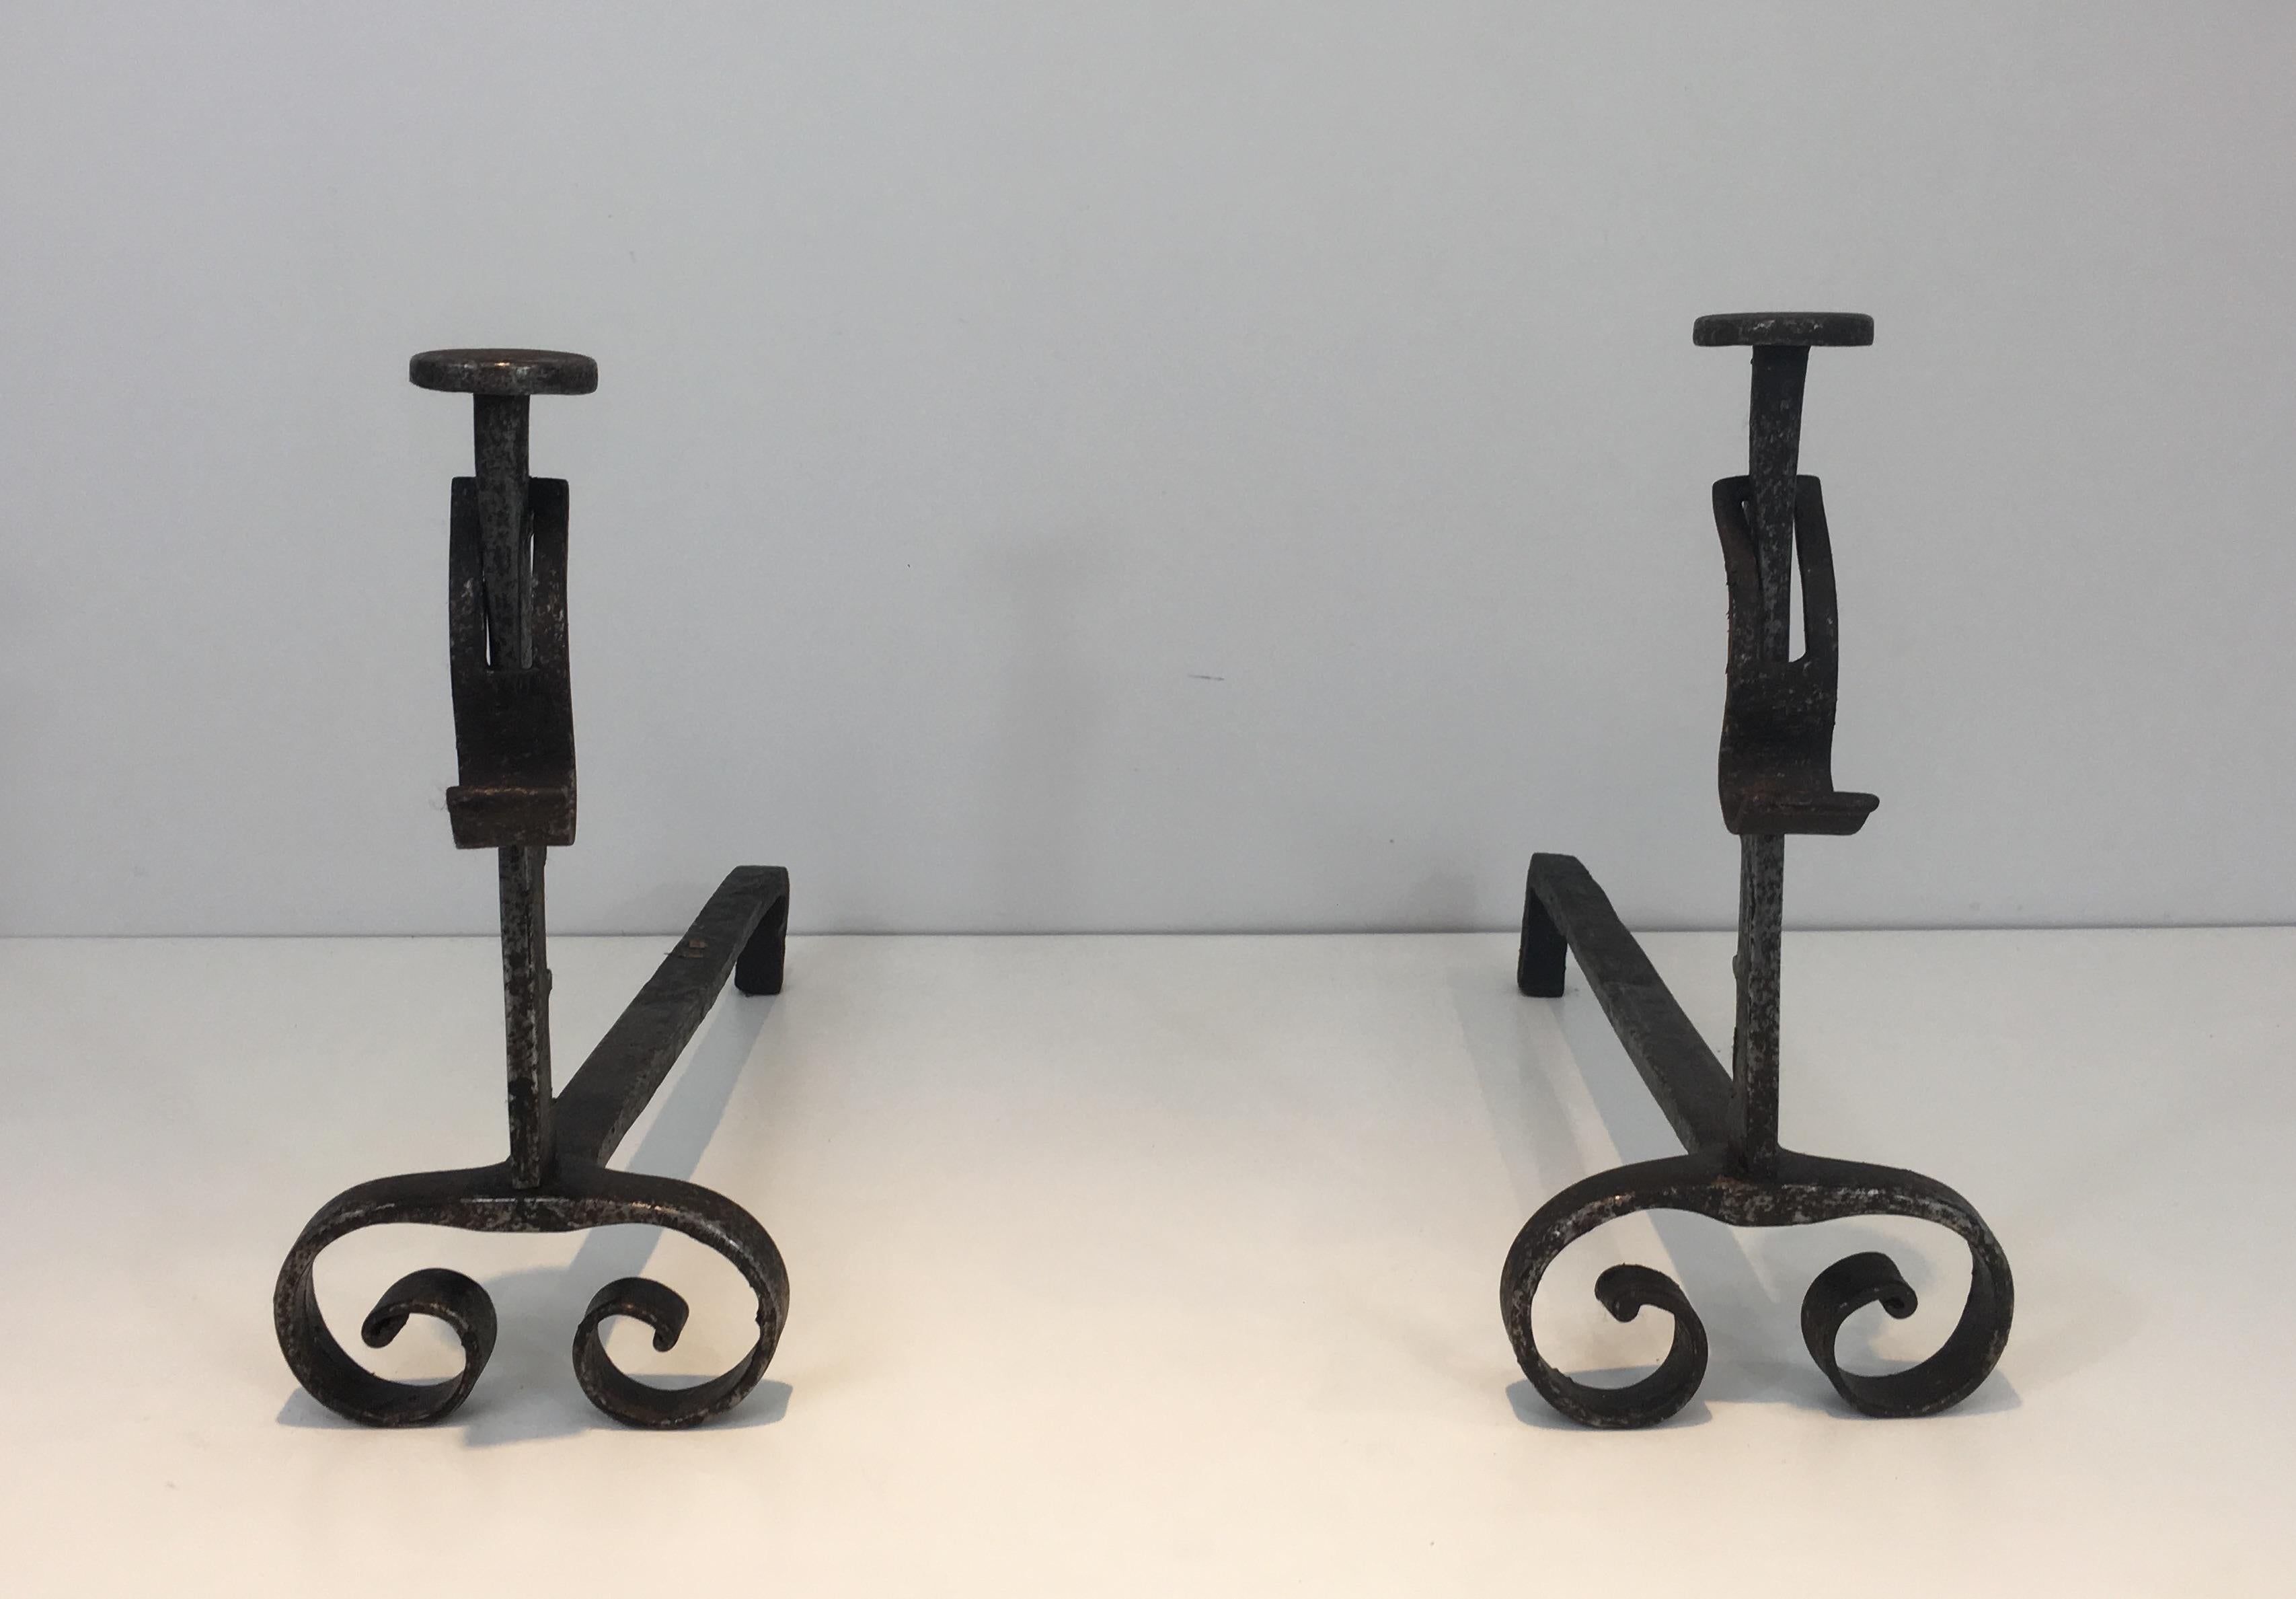 This rack and pinions andirons are made of forged wrought iron. They are French, from 19th century.